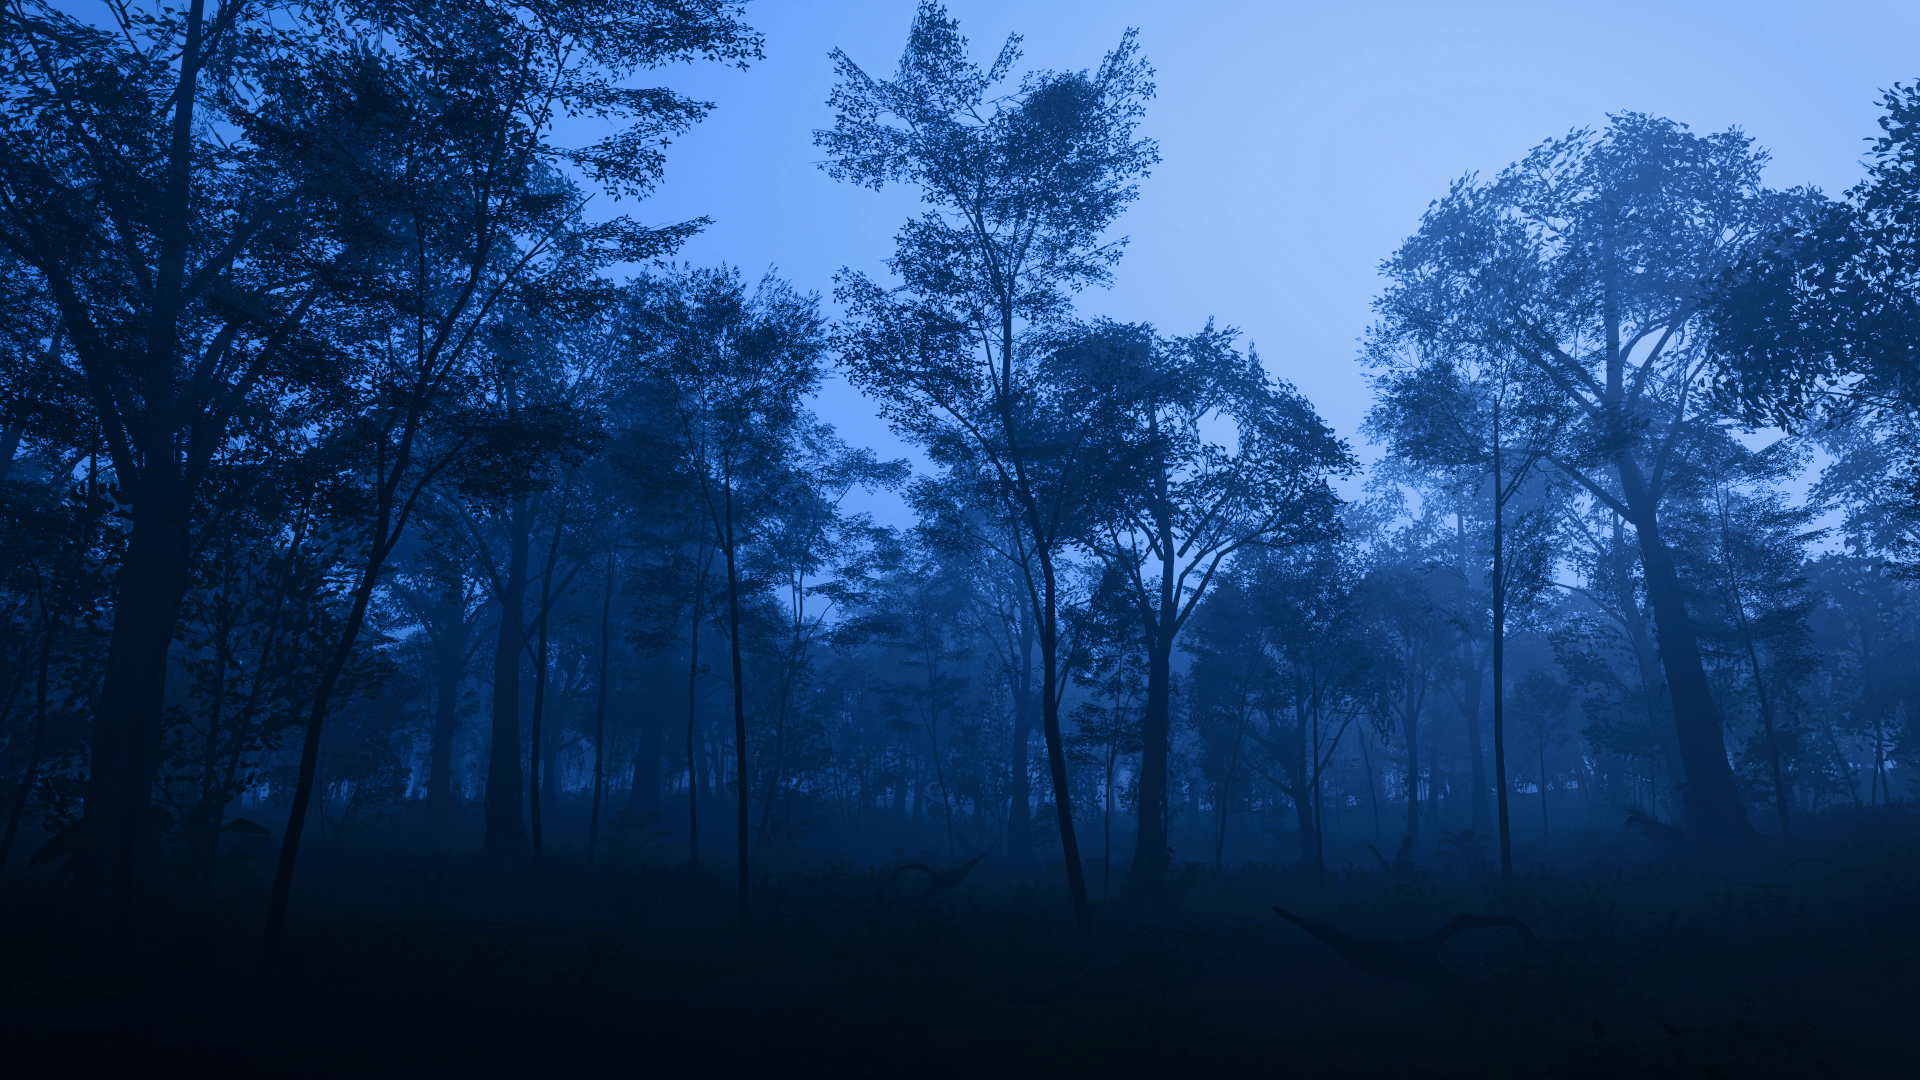 General 1920x1080 video games Forza Forza Horizon 5 trees forest dark blue PlaygroundGames nature video game art screen shot sky CGI low light